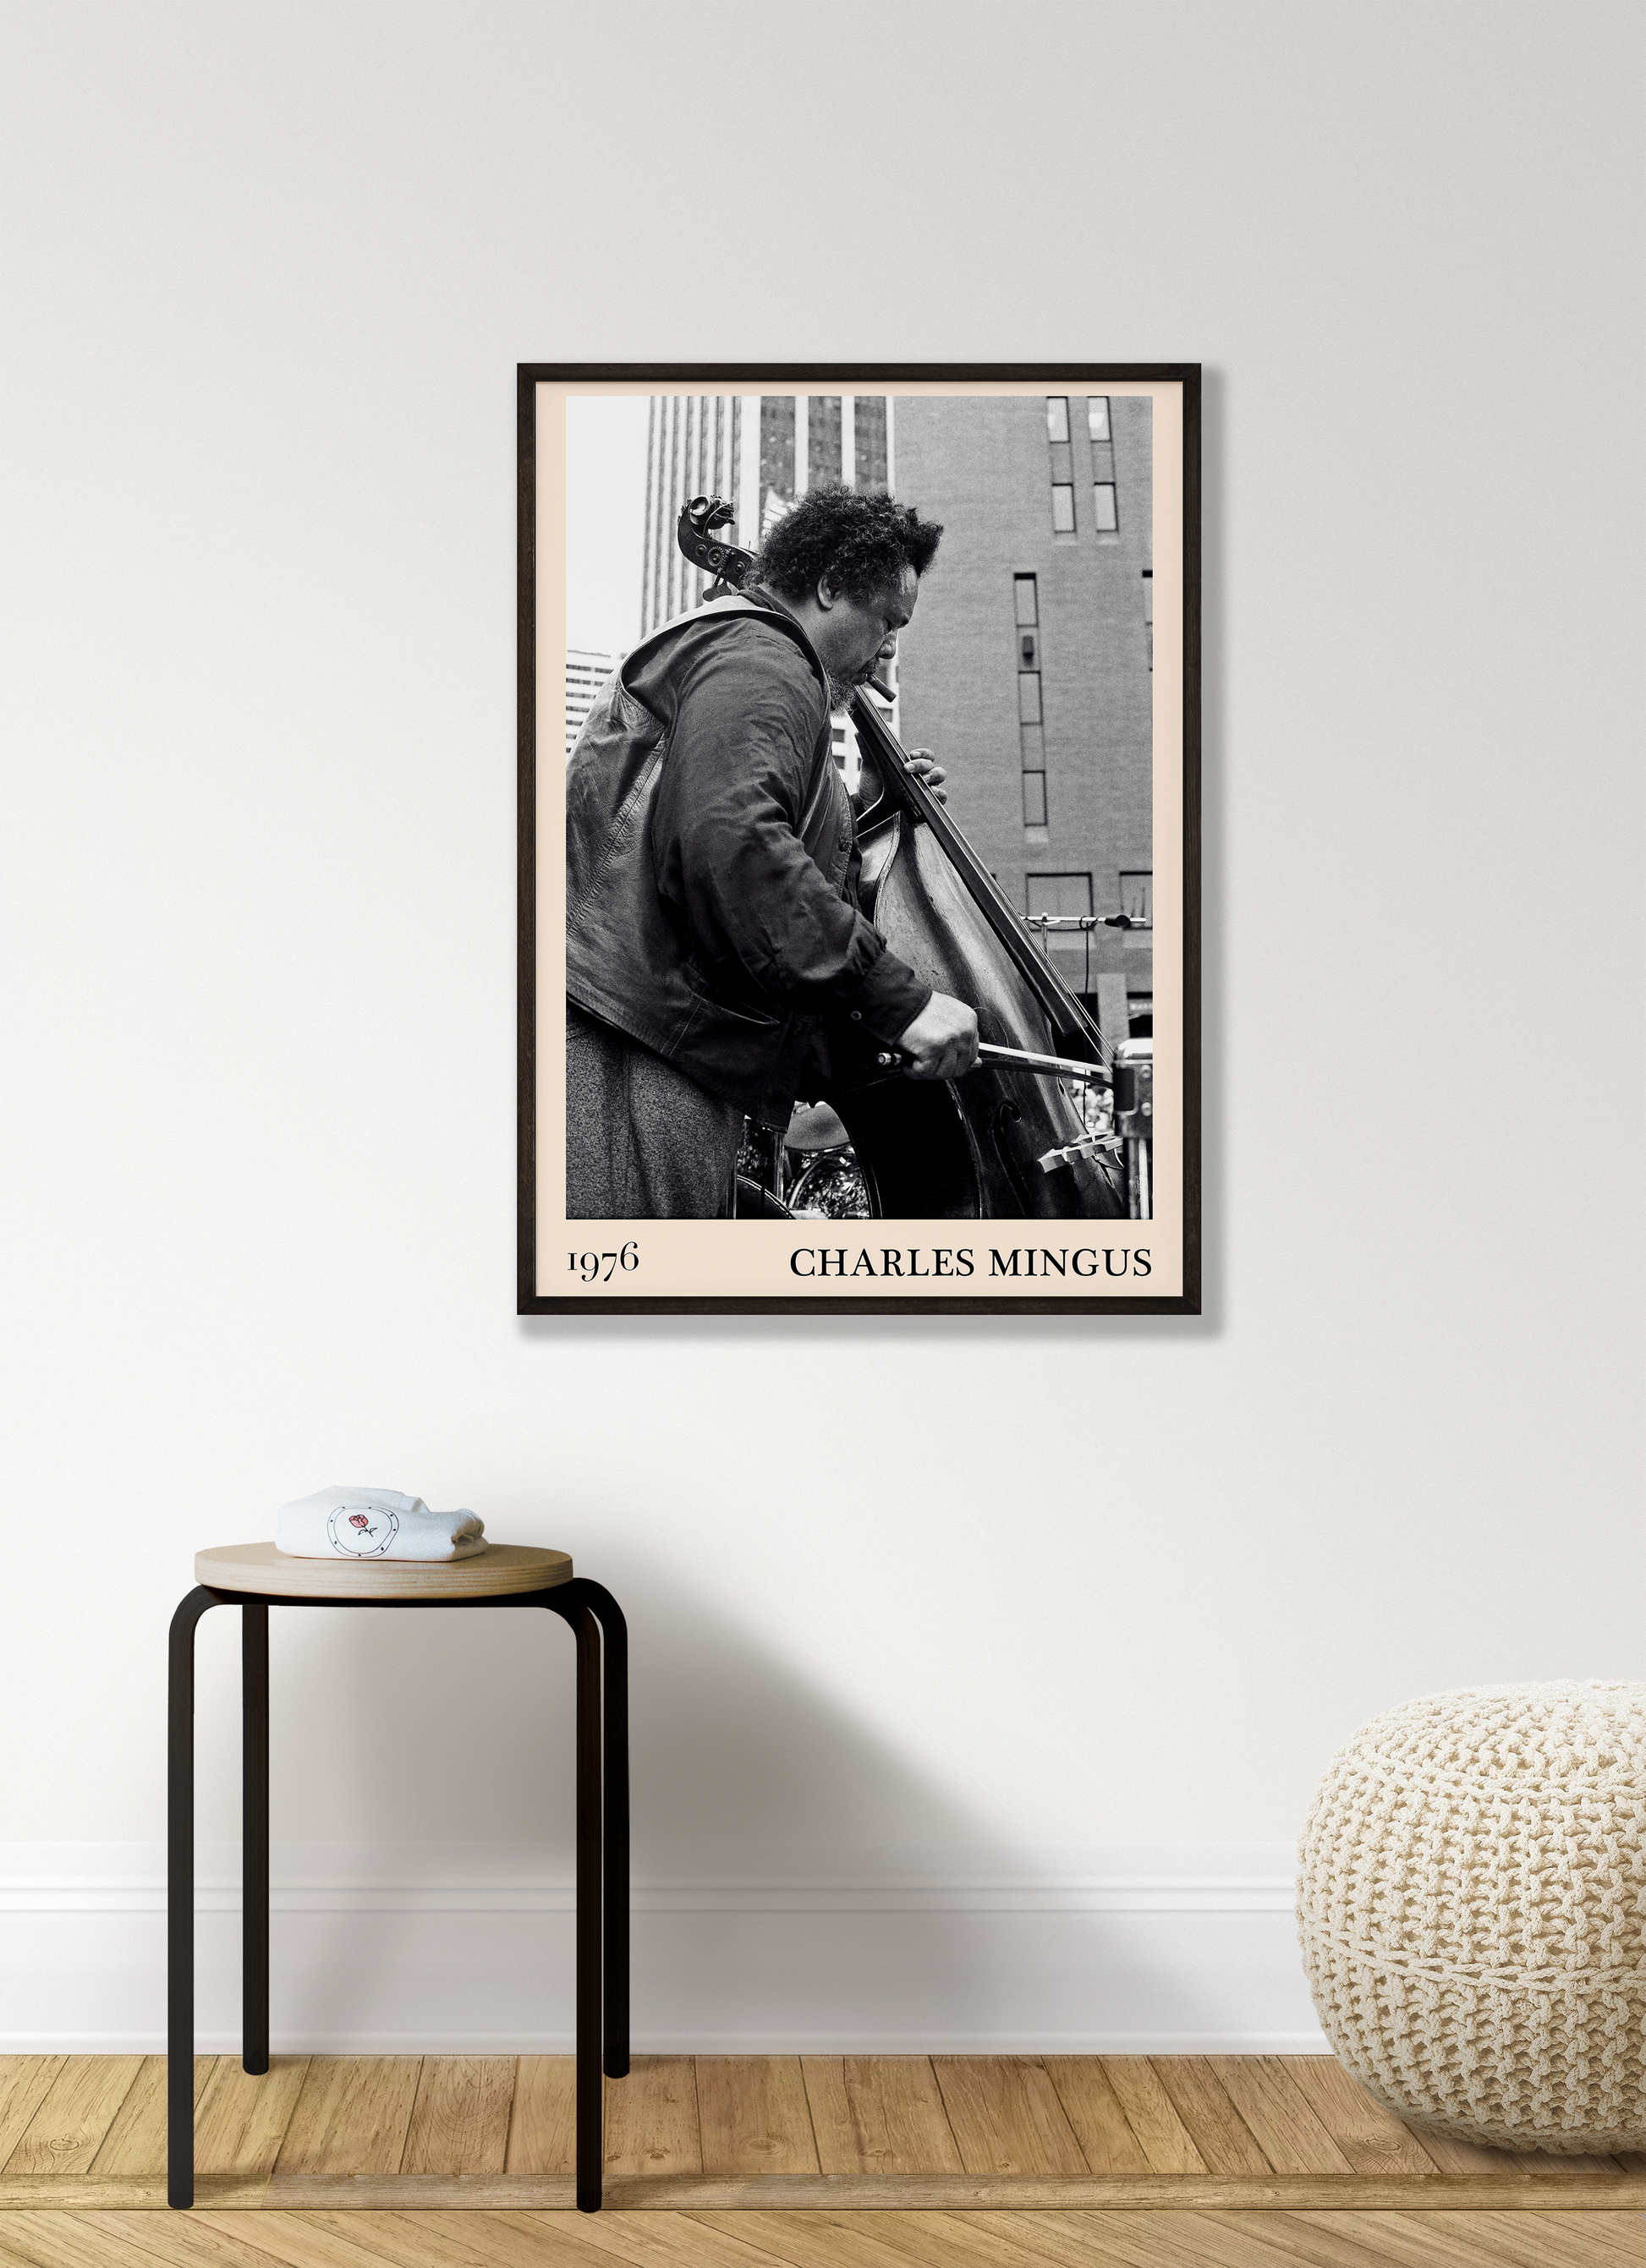 1976 photograph of Charles Mingus taken by Thomas Marcello. Picture crafted into a cool black framed music print, with an off-white border. Poster is hanging on a white living room wall.